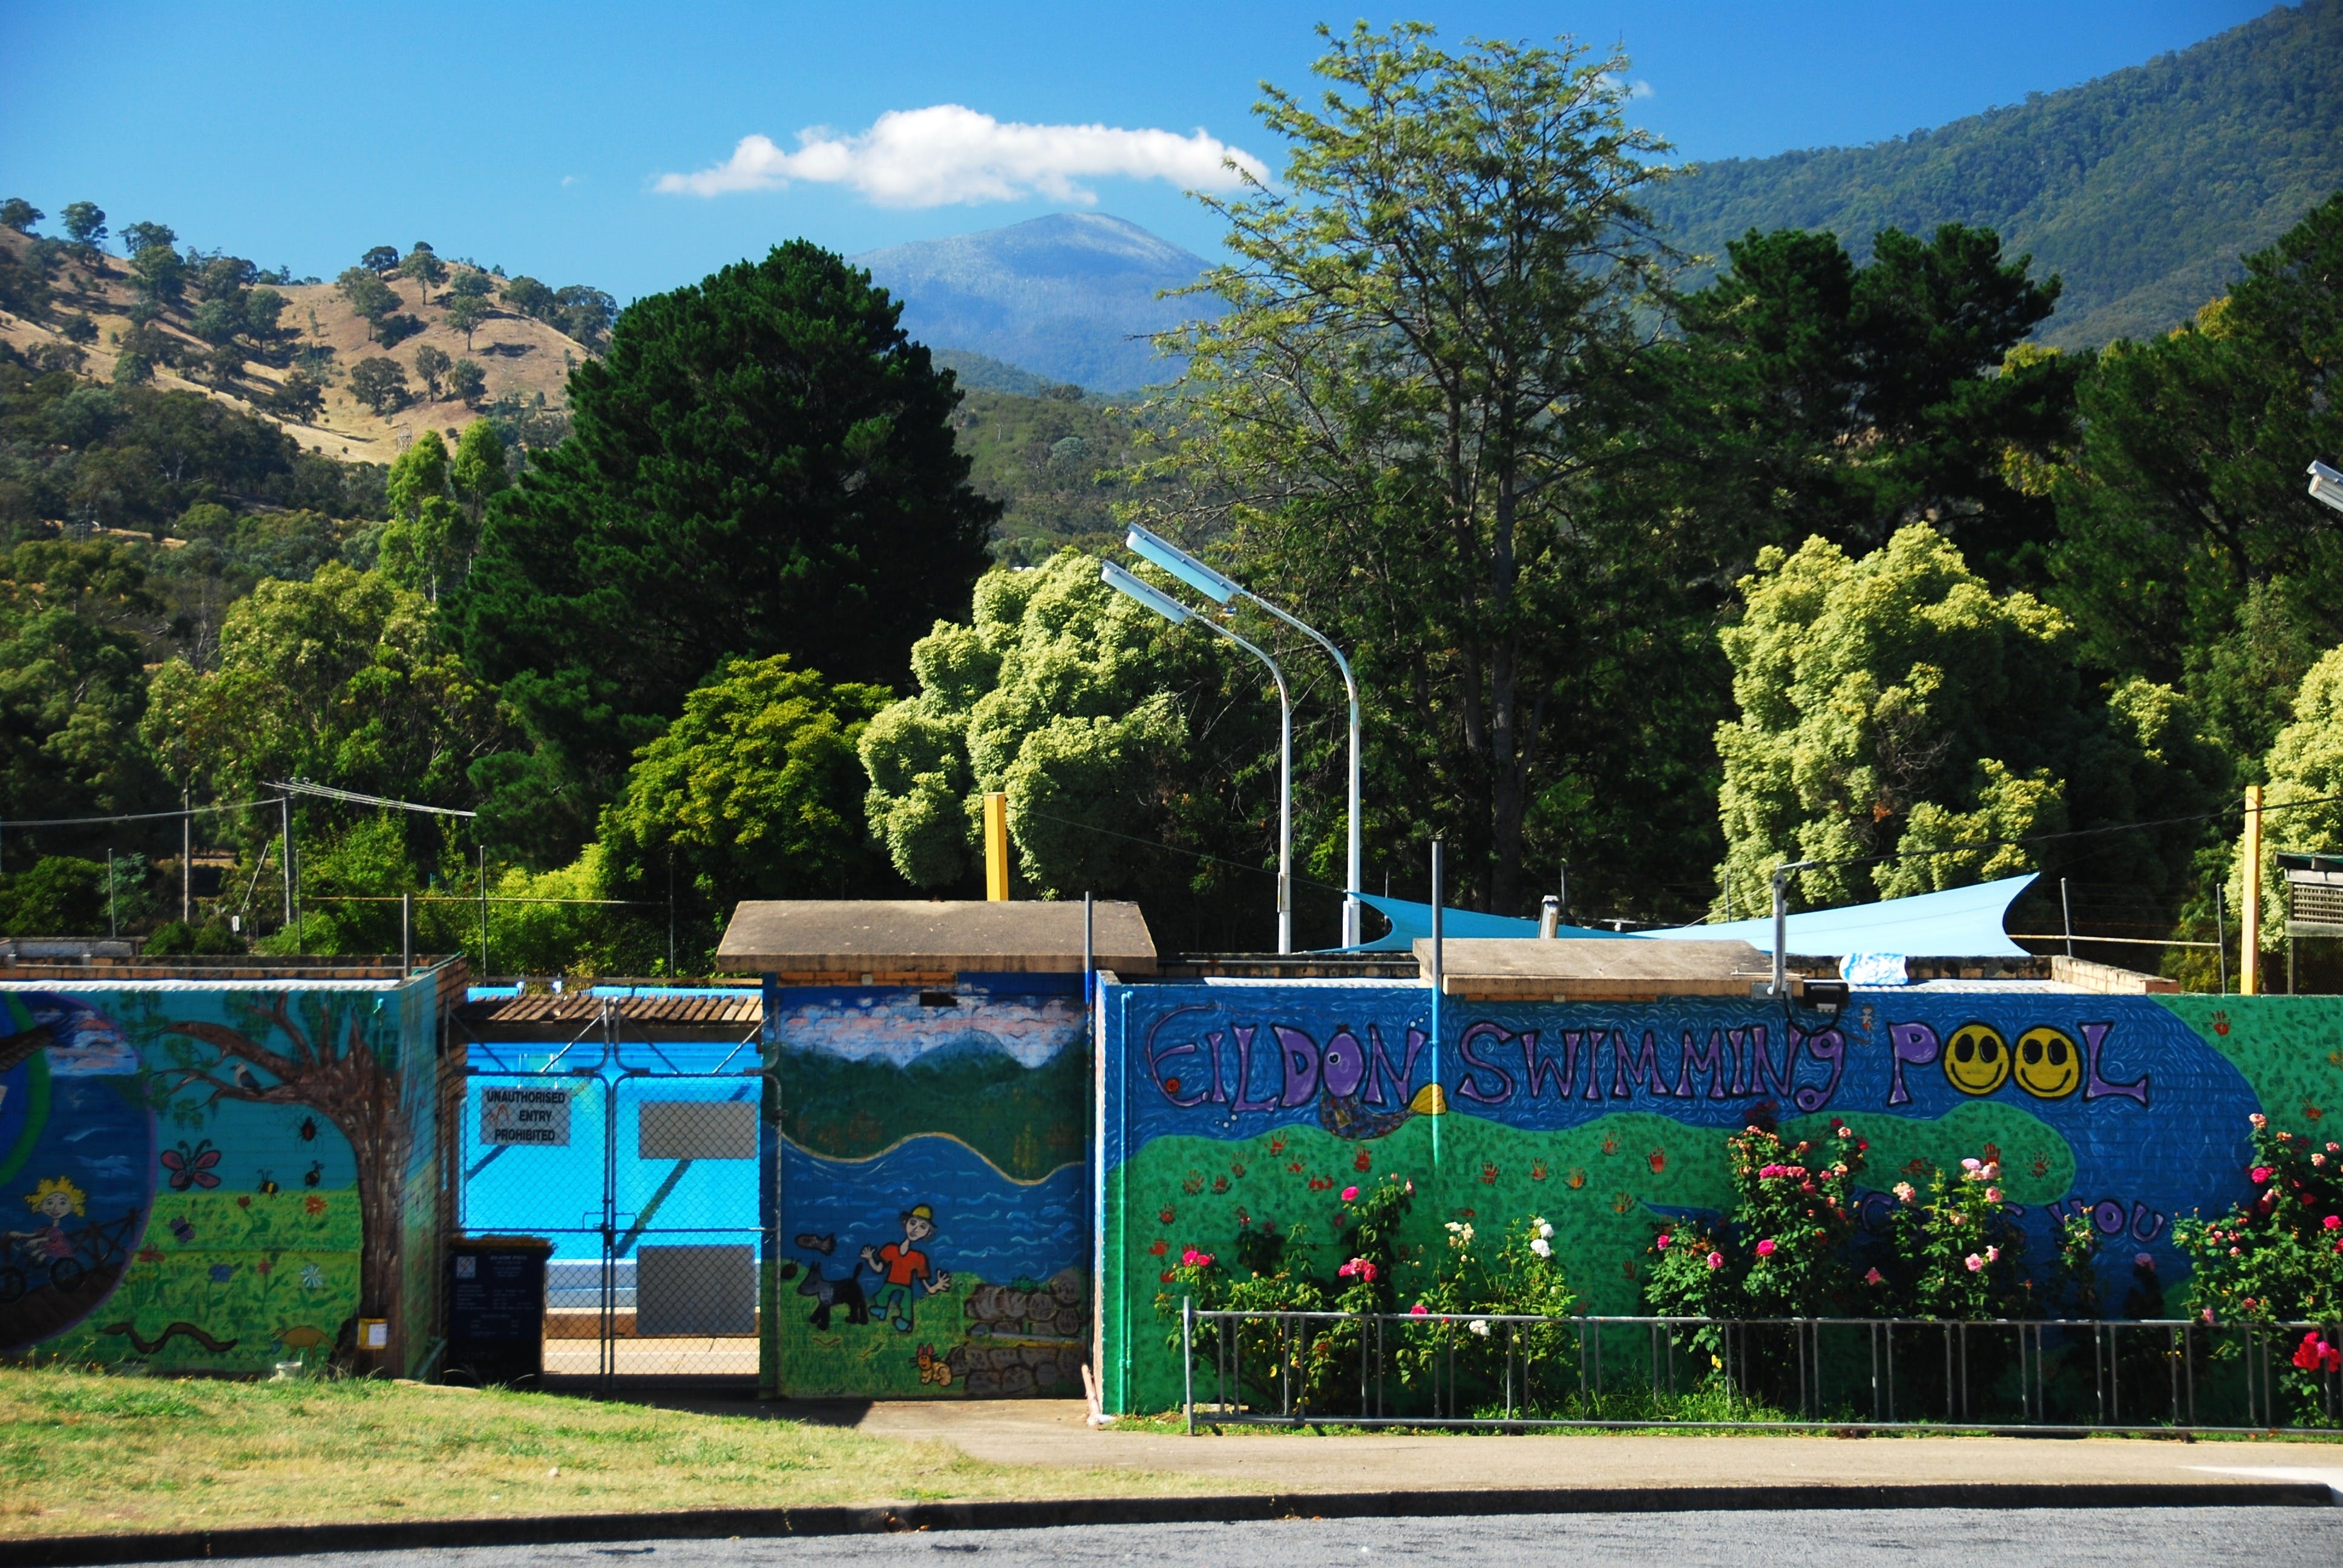 Eildon Outdoor Swimming Pool - Attractions